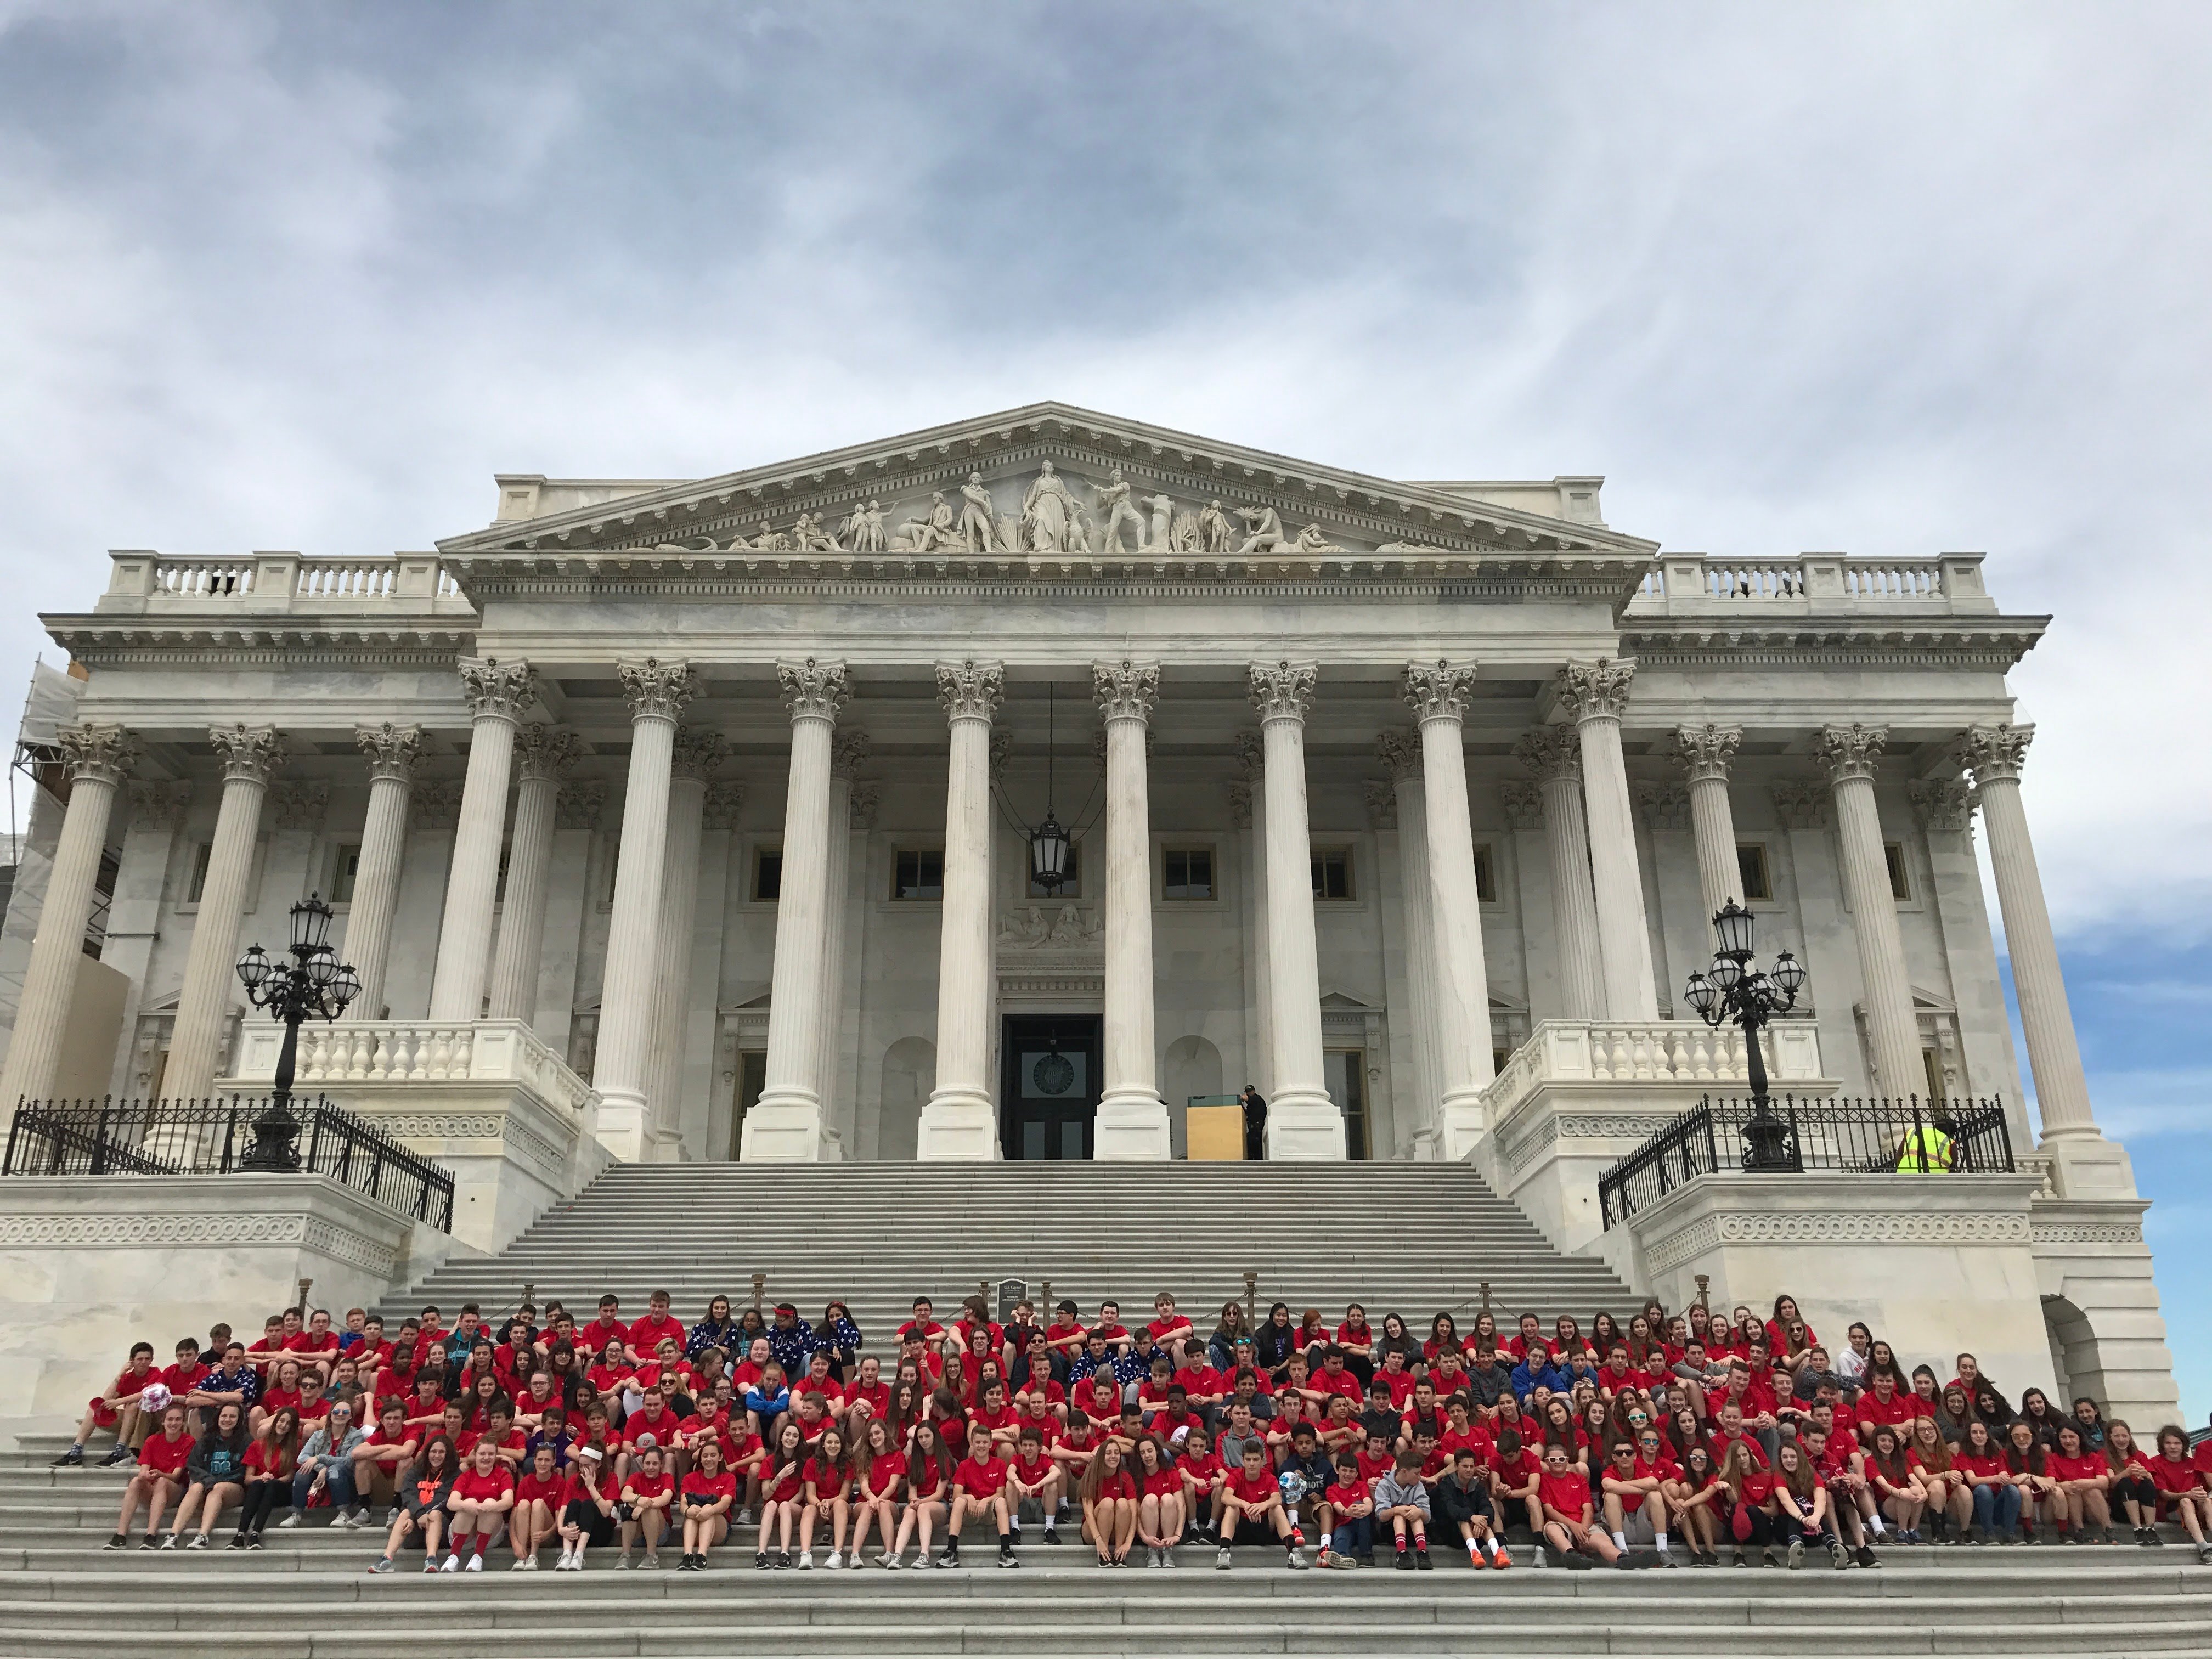 Student group sitting on the U.S Capitol building steps.